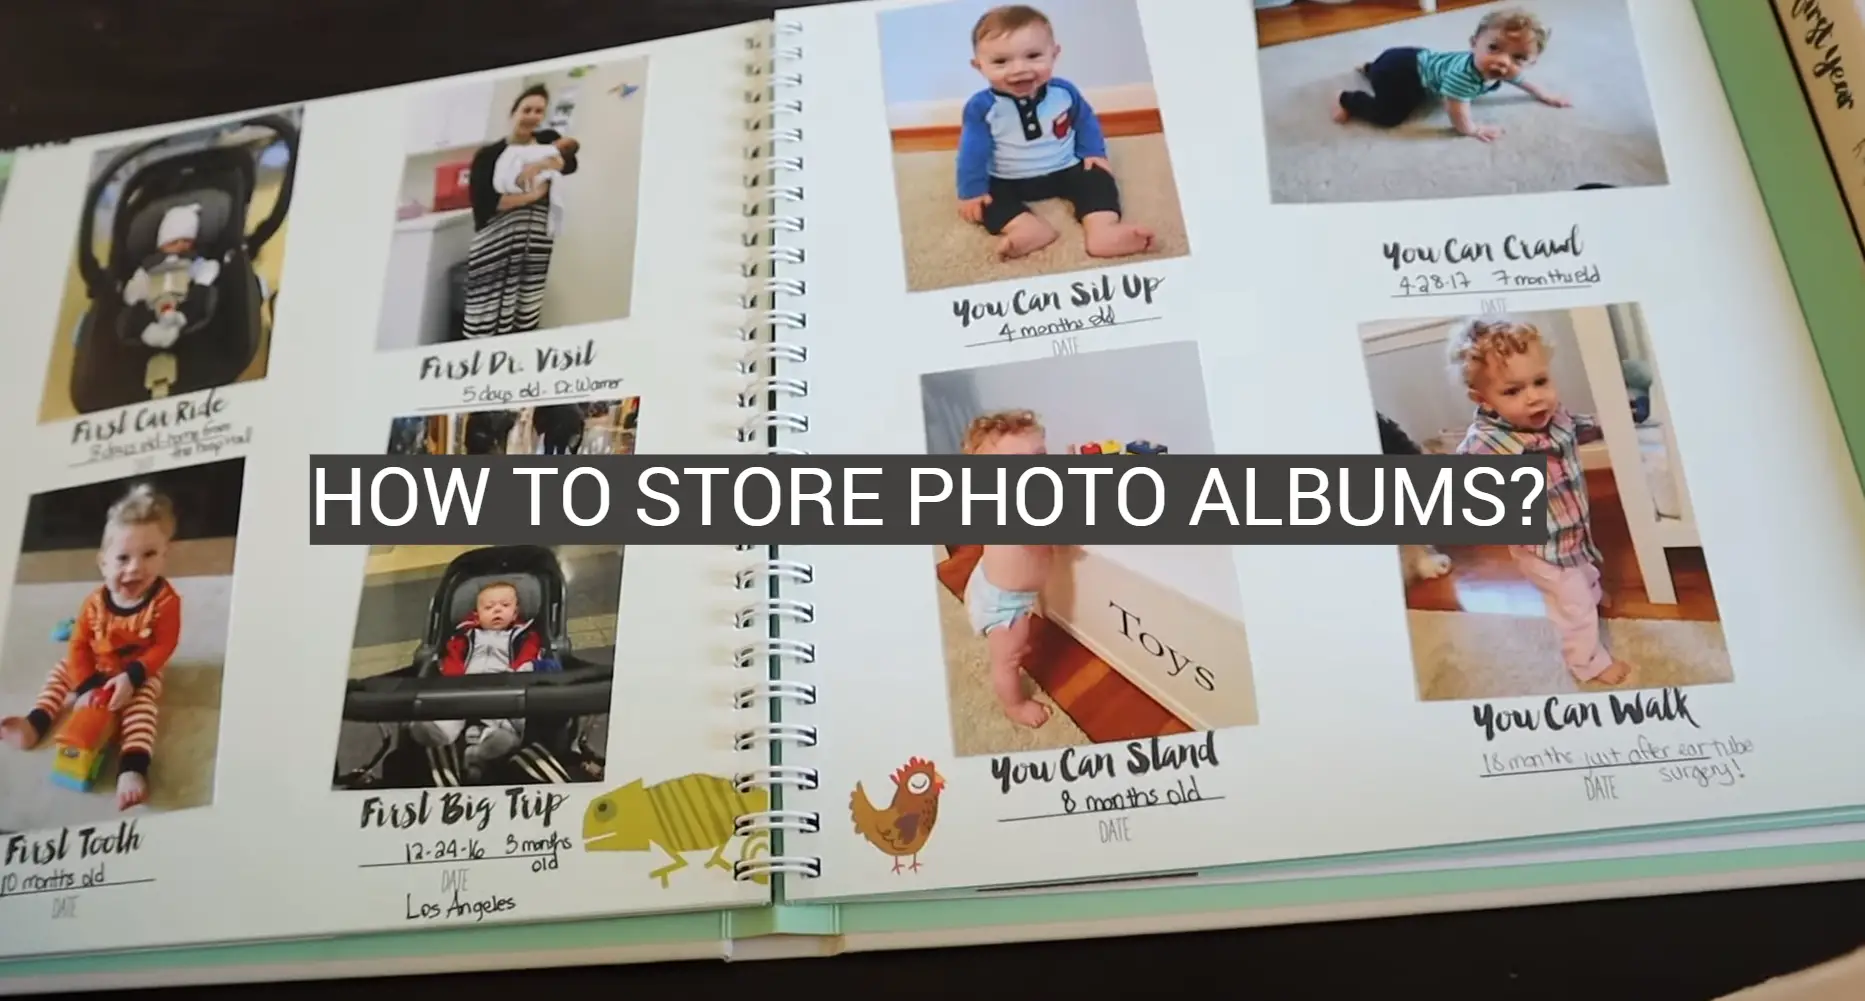 How to Store Photo Albums?